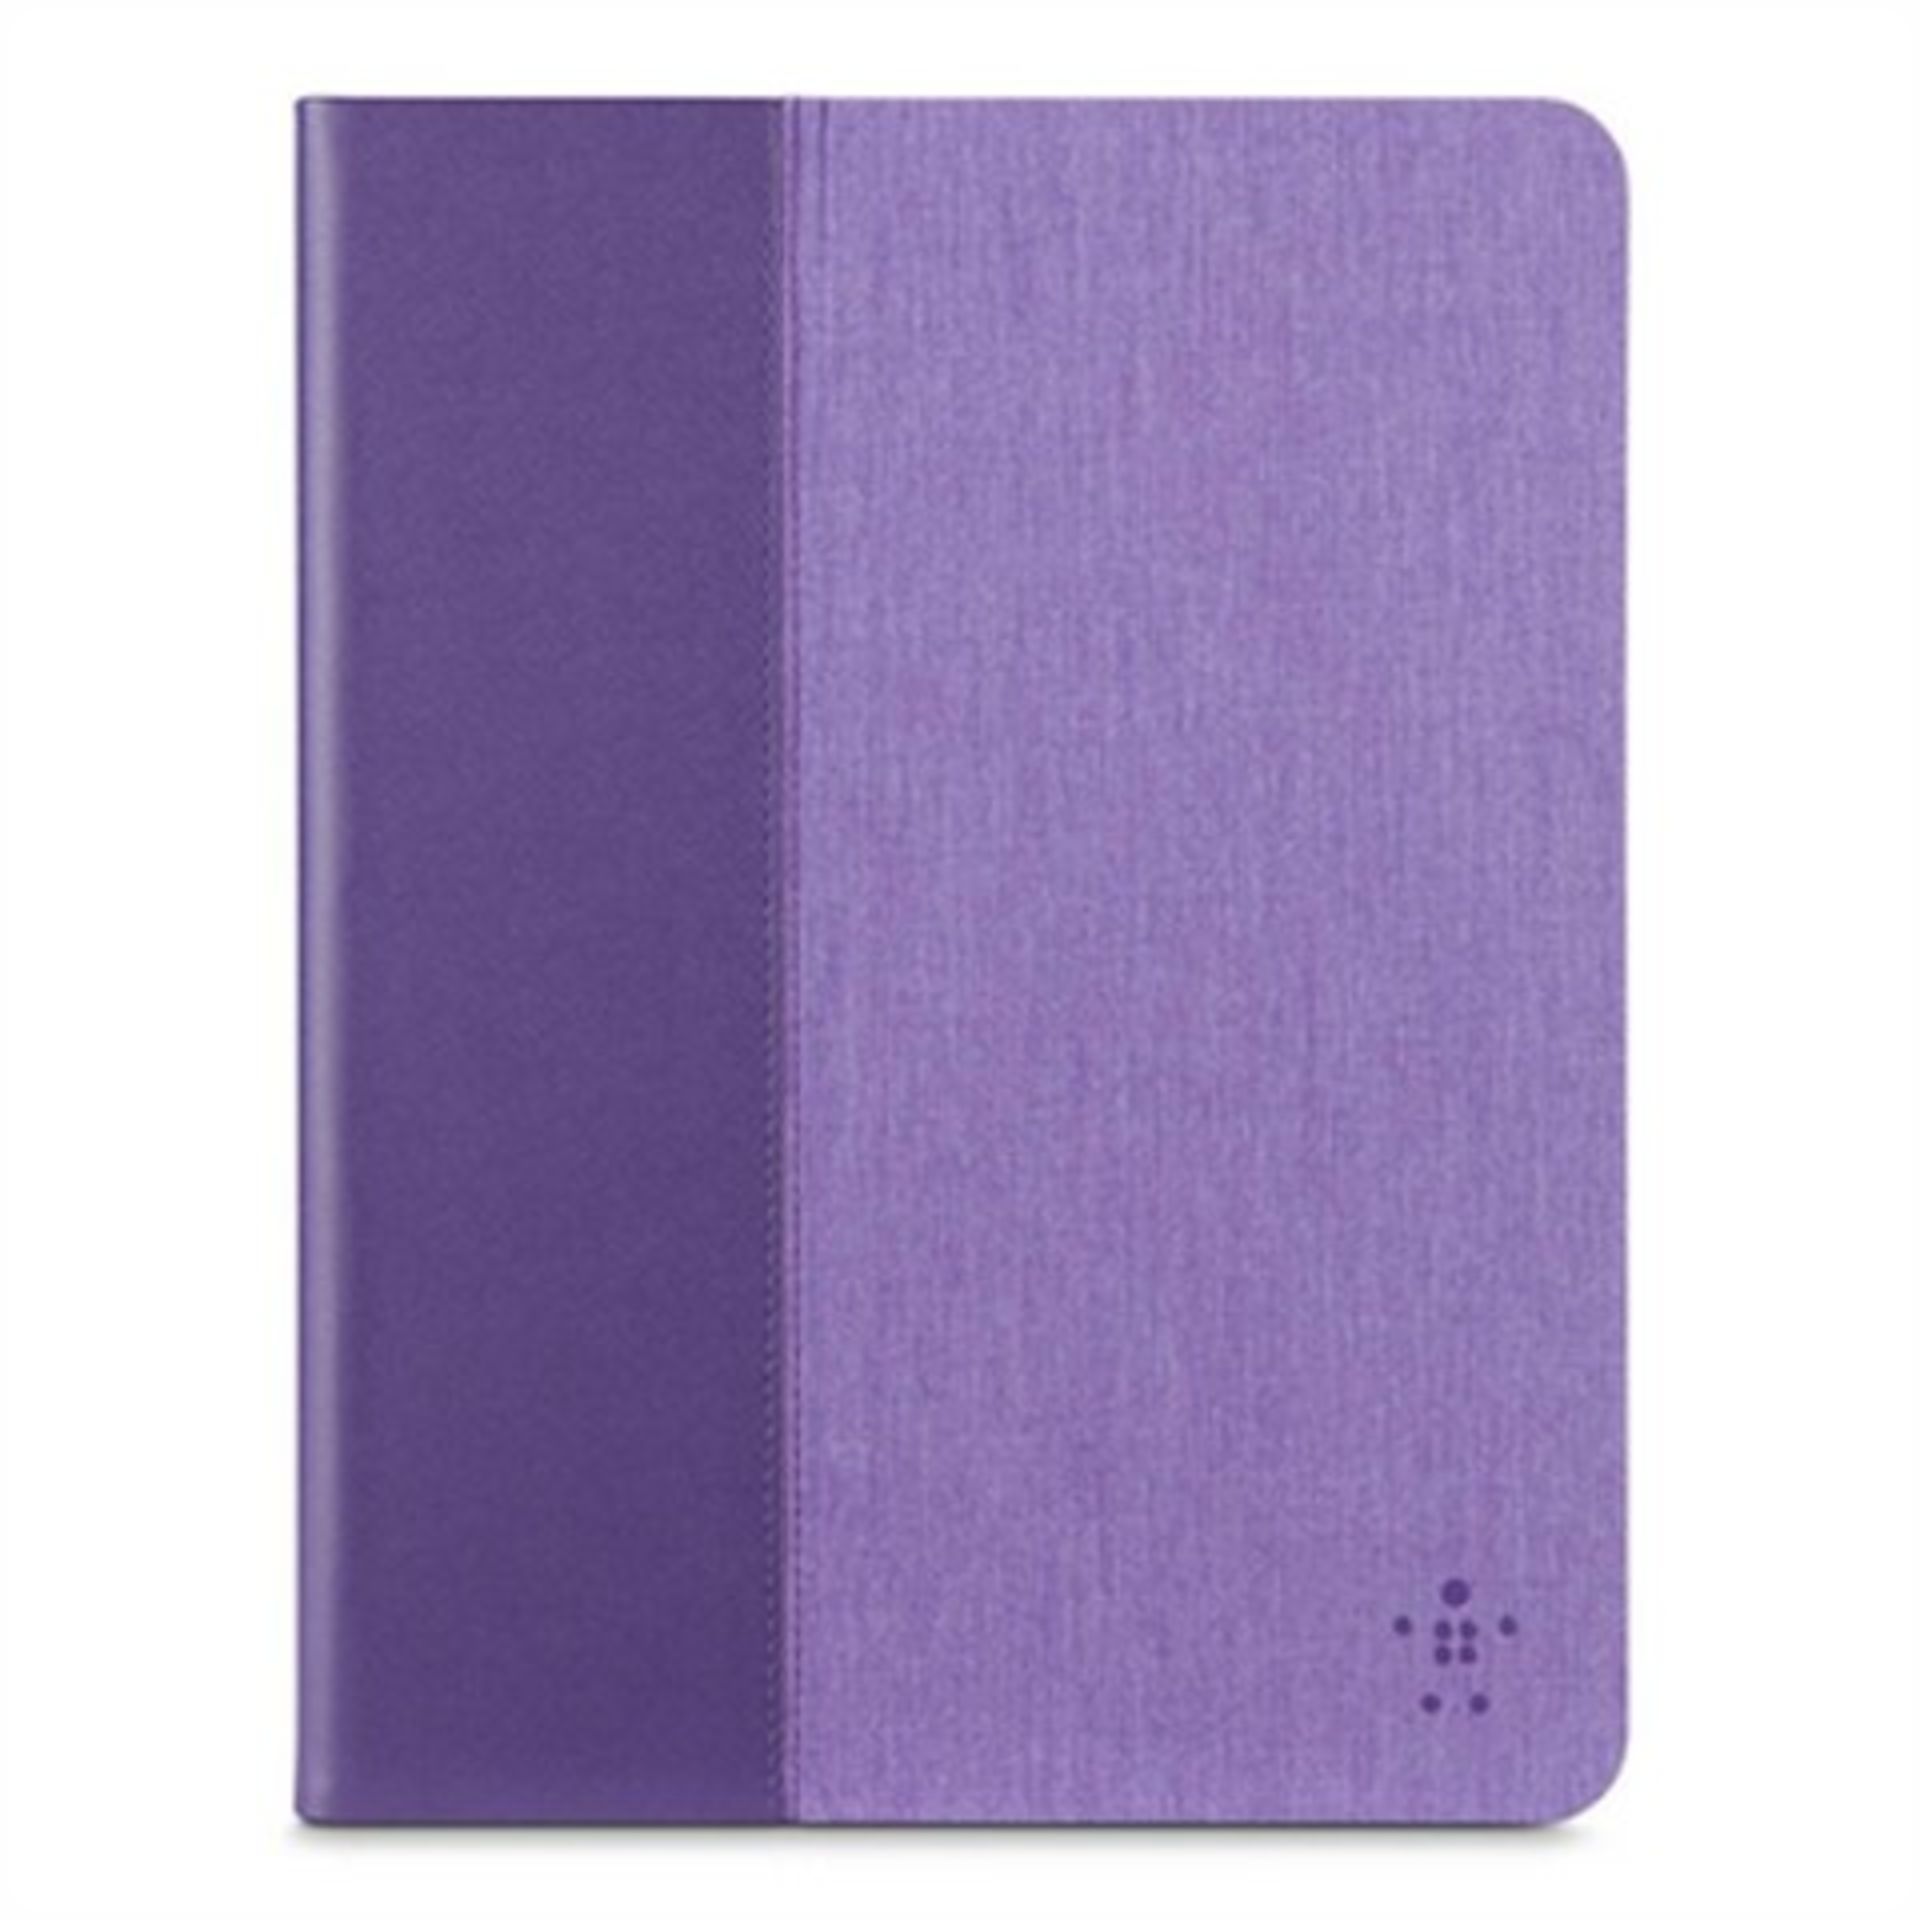 + VAT Brand New Belkin Purple Chambray Cover For iPad Air & iPad Air 2 - Slim Design - Made For